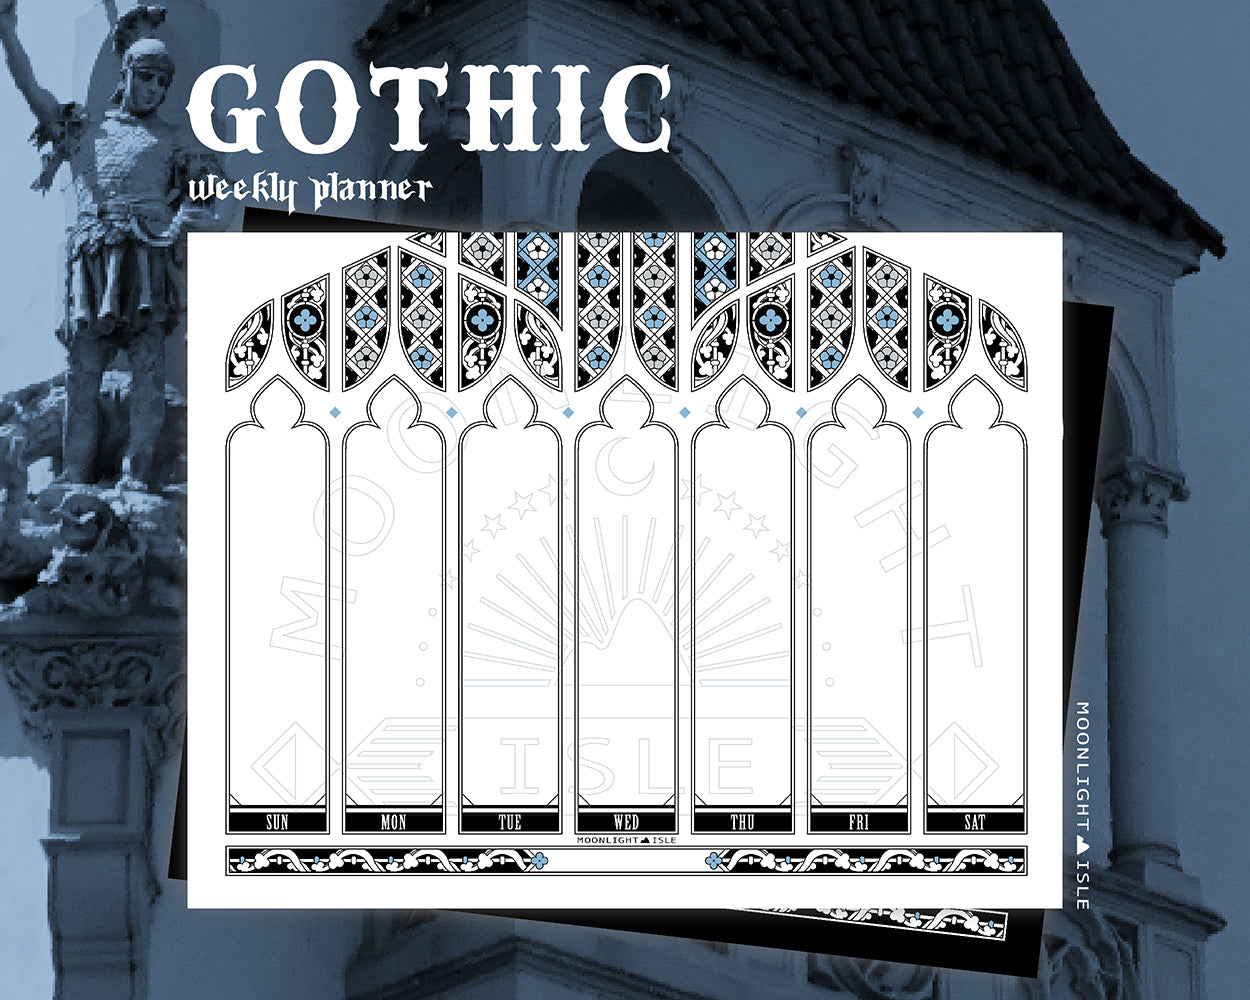 Gothic Weekly Planner